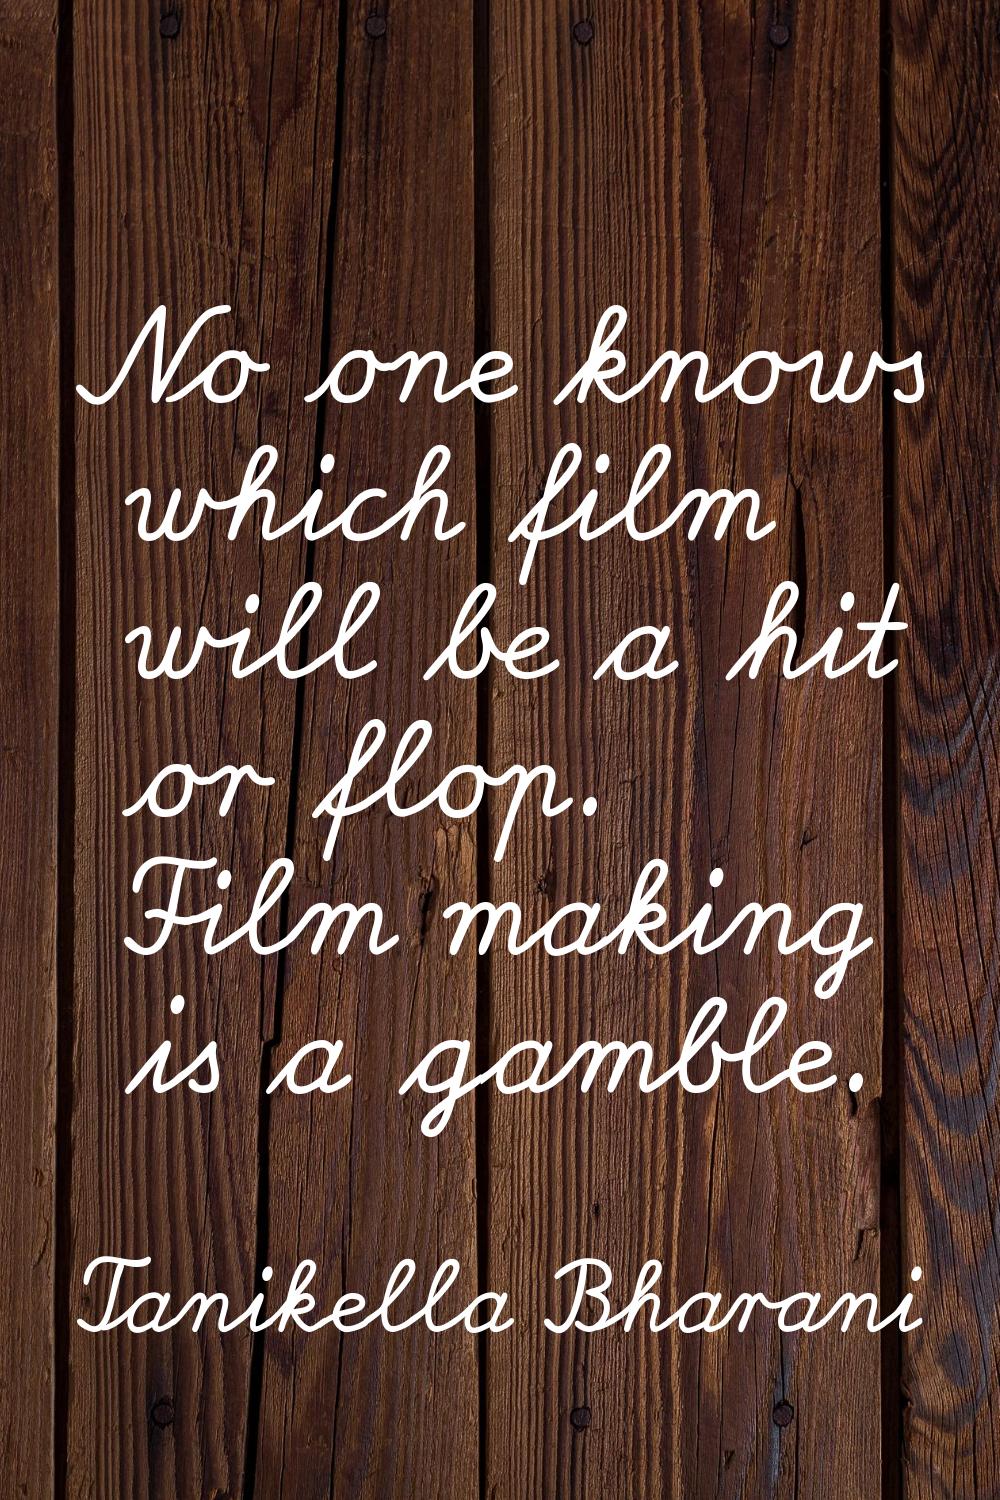 No one knows which film will be a hit or flop. Film making is a gamble.